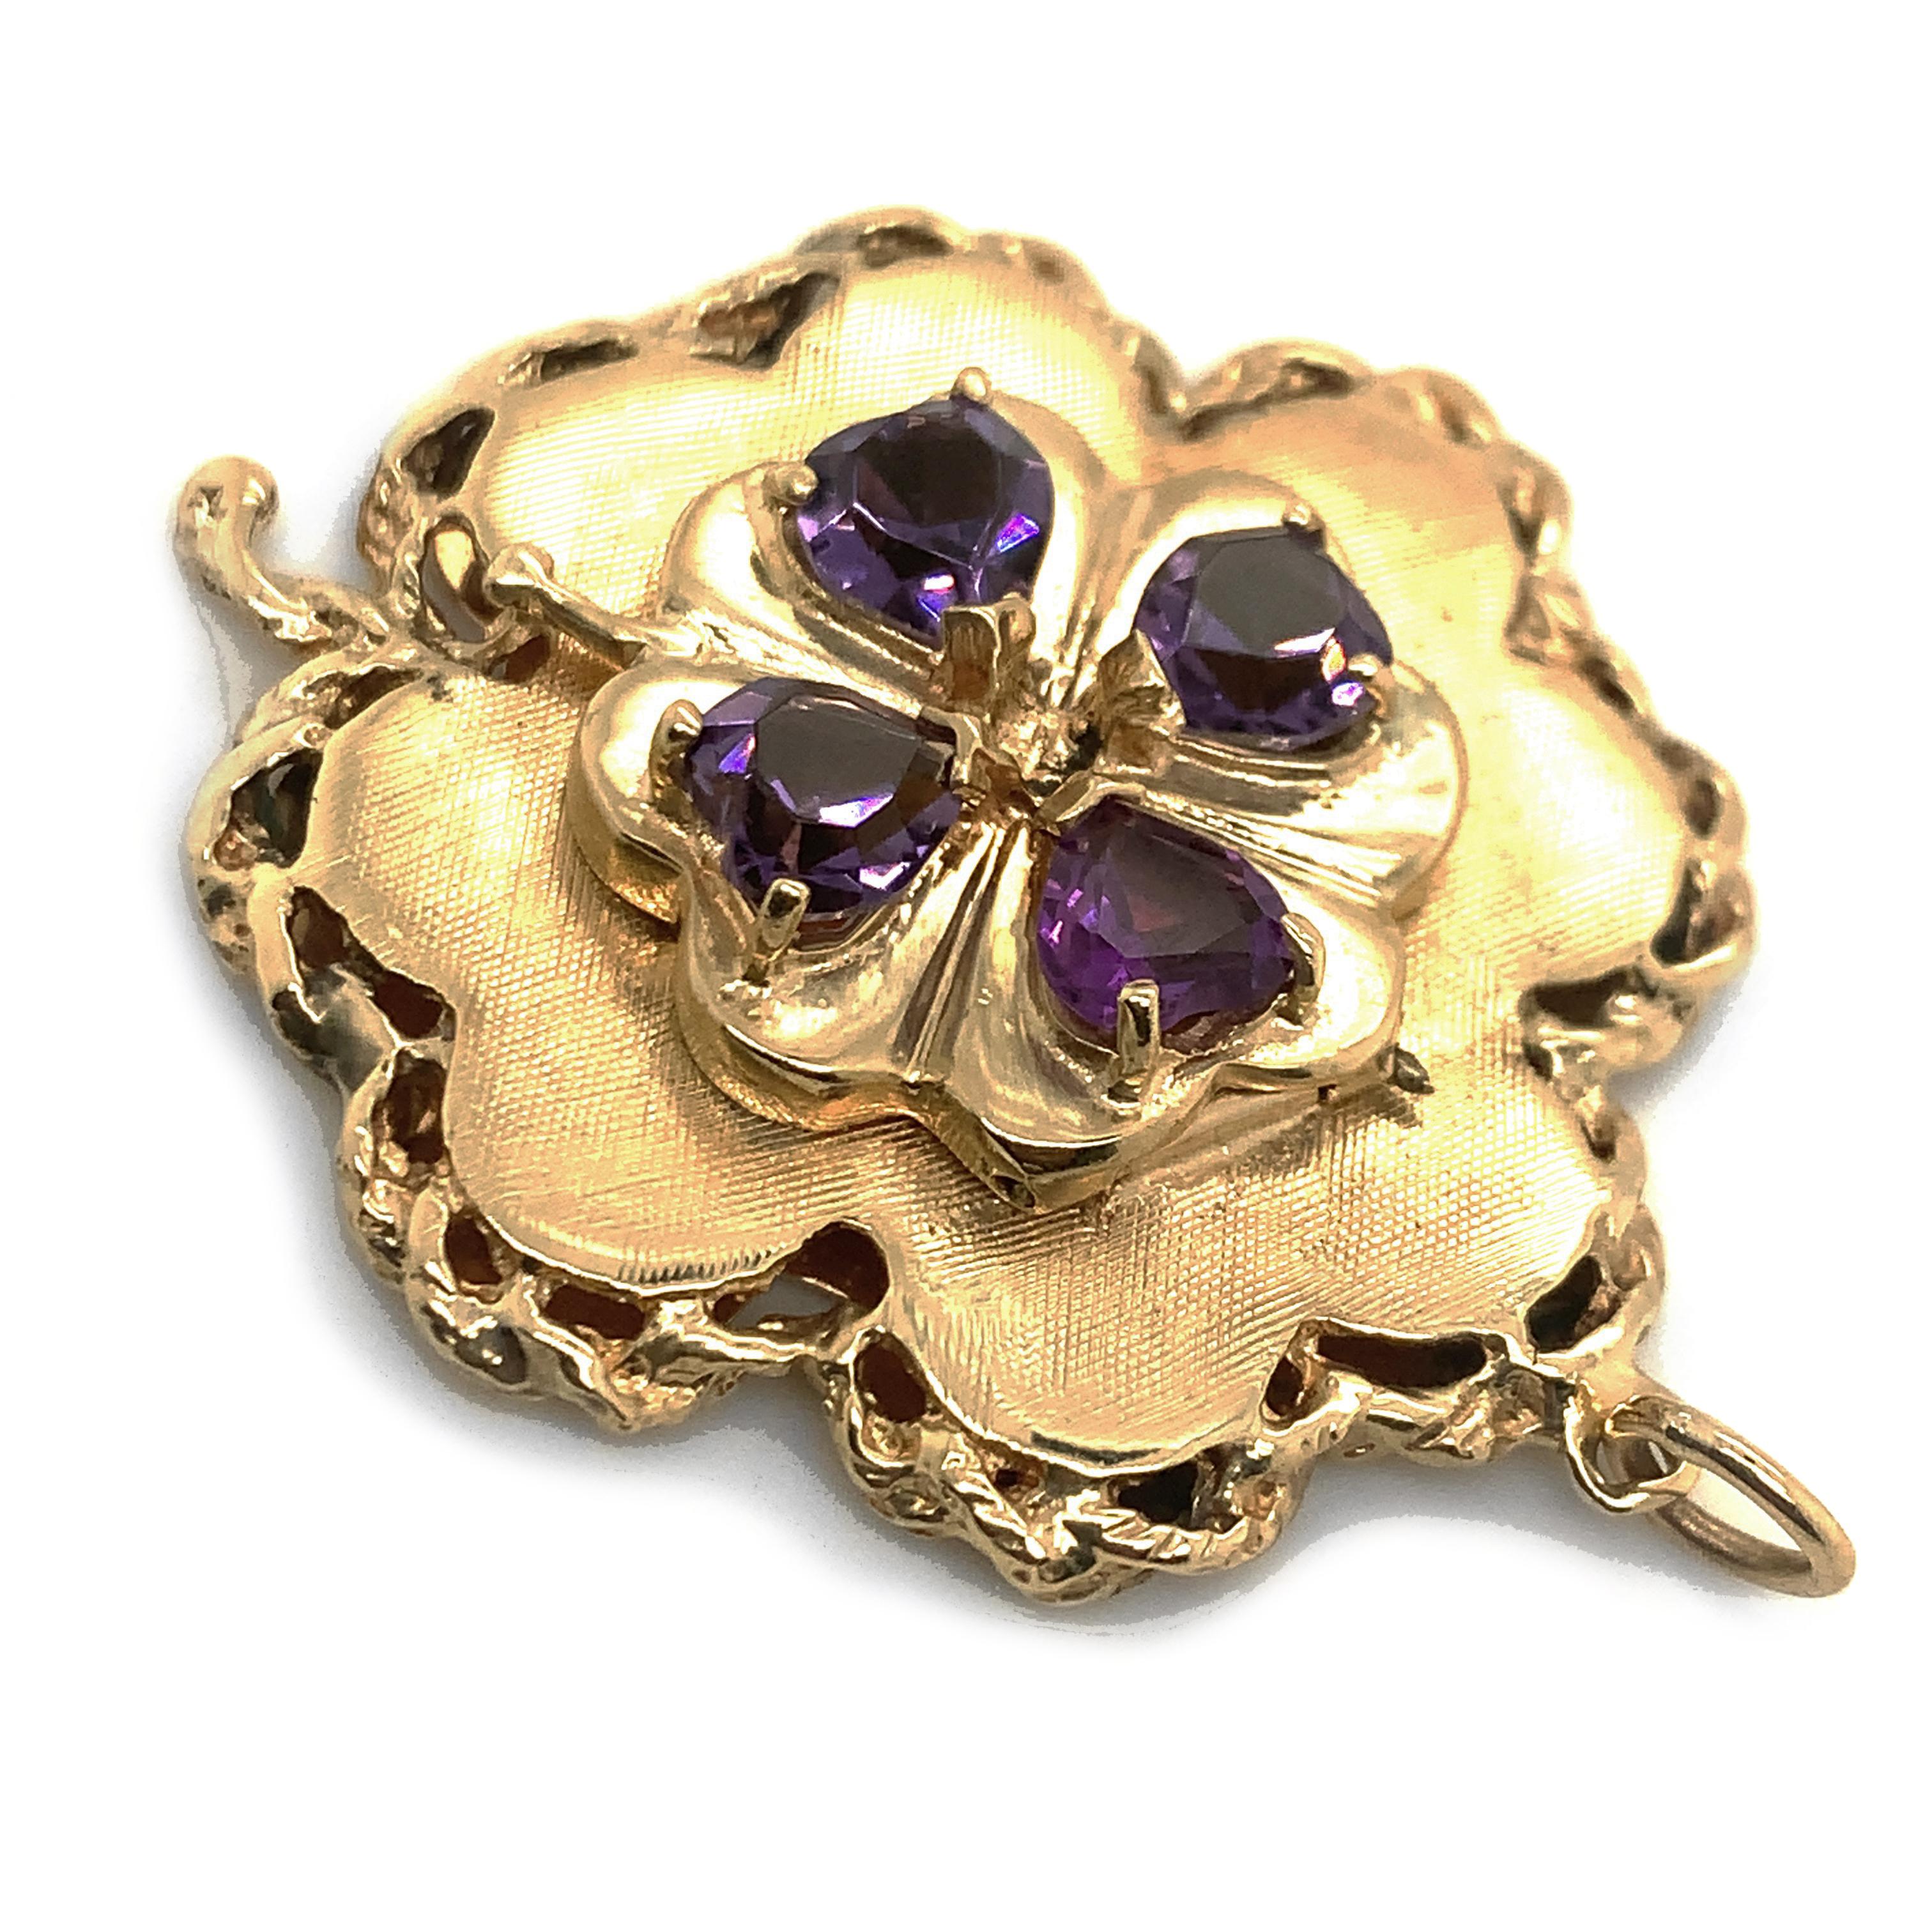 Striking large four leaf clover pendant/charm.  Four heart-shaped sparkling purple amethysts create a quatrefoil that beautifully join the themes of luck and love. This pendant is framed with a textured rope that highlight the retro craftsmanship to